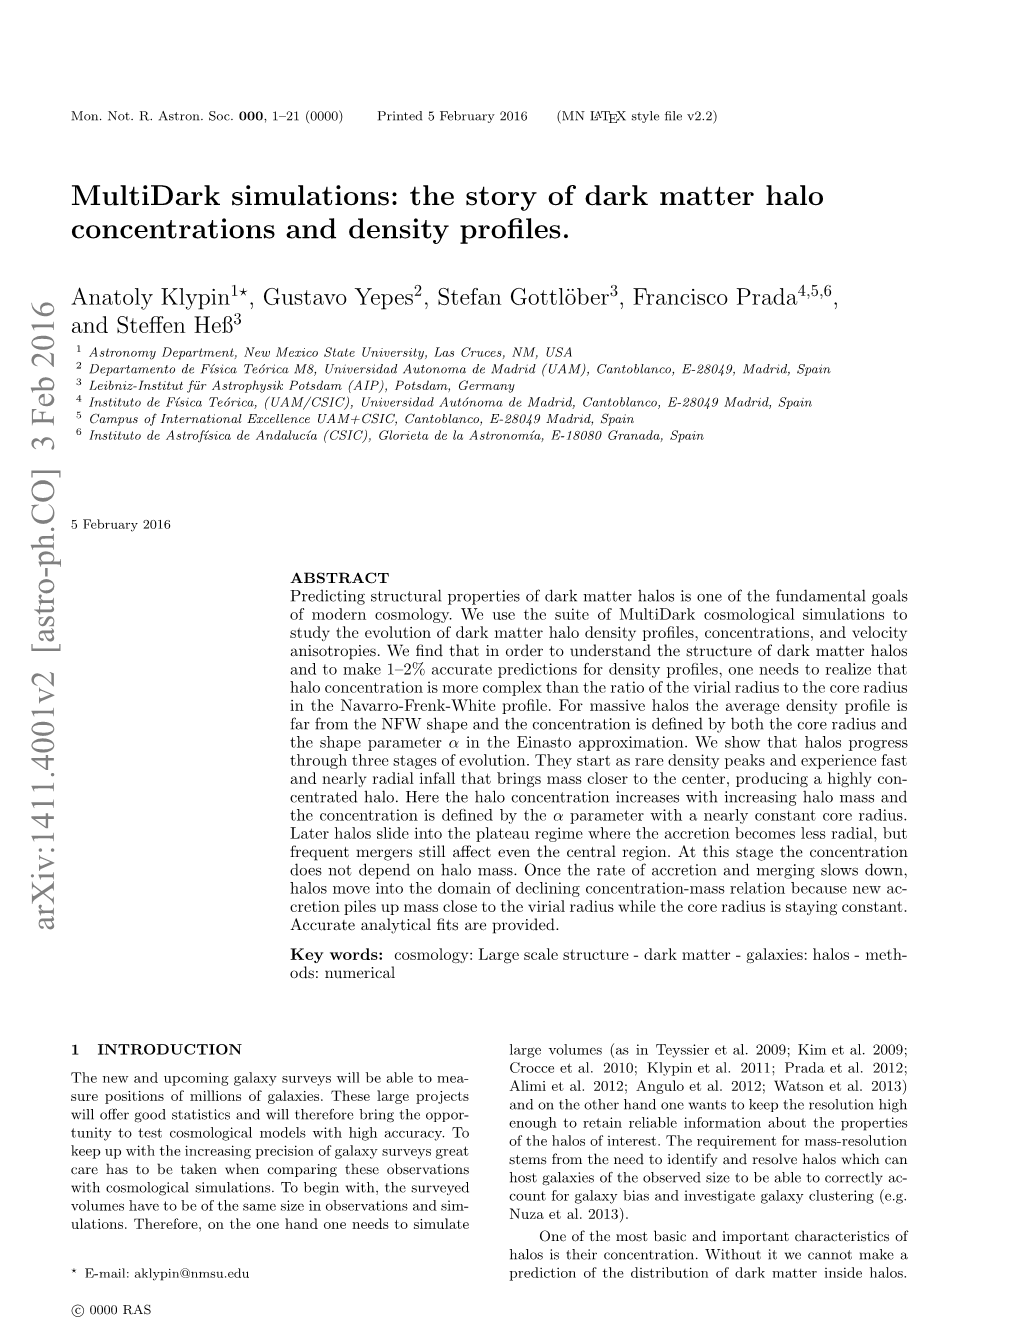 The Story of Dark Matter Halo Concentrations and Density Profiles